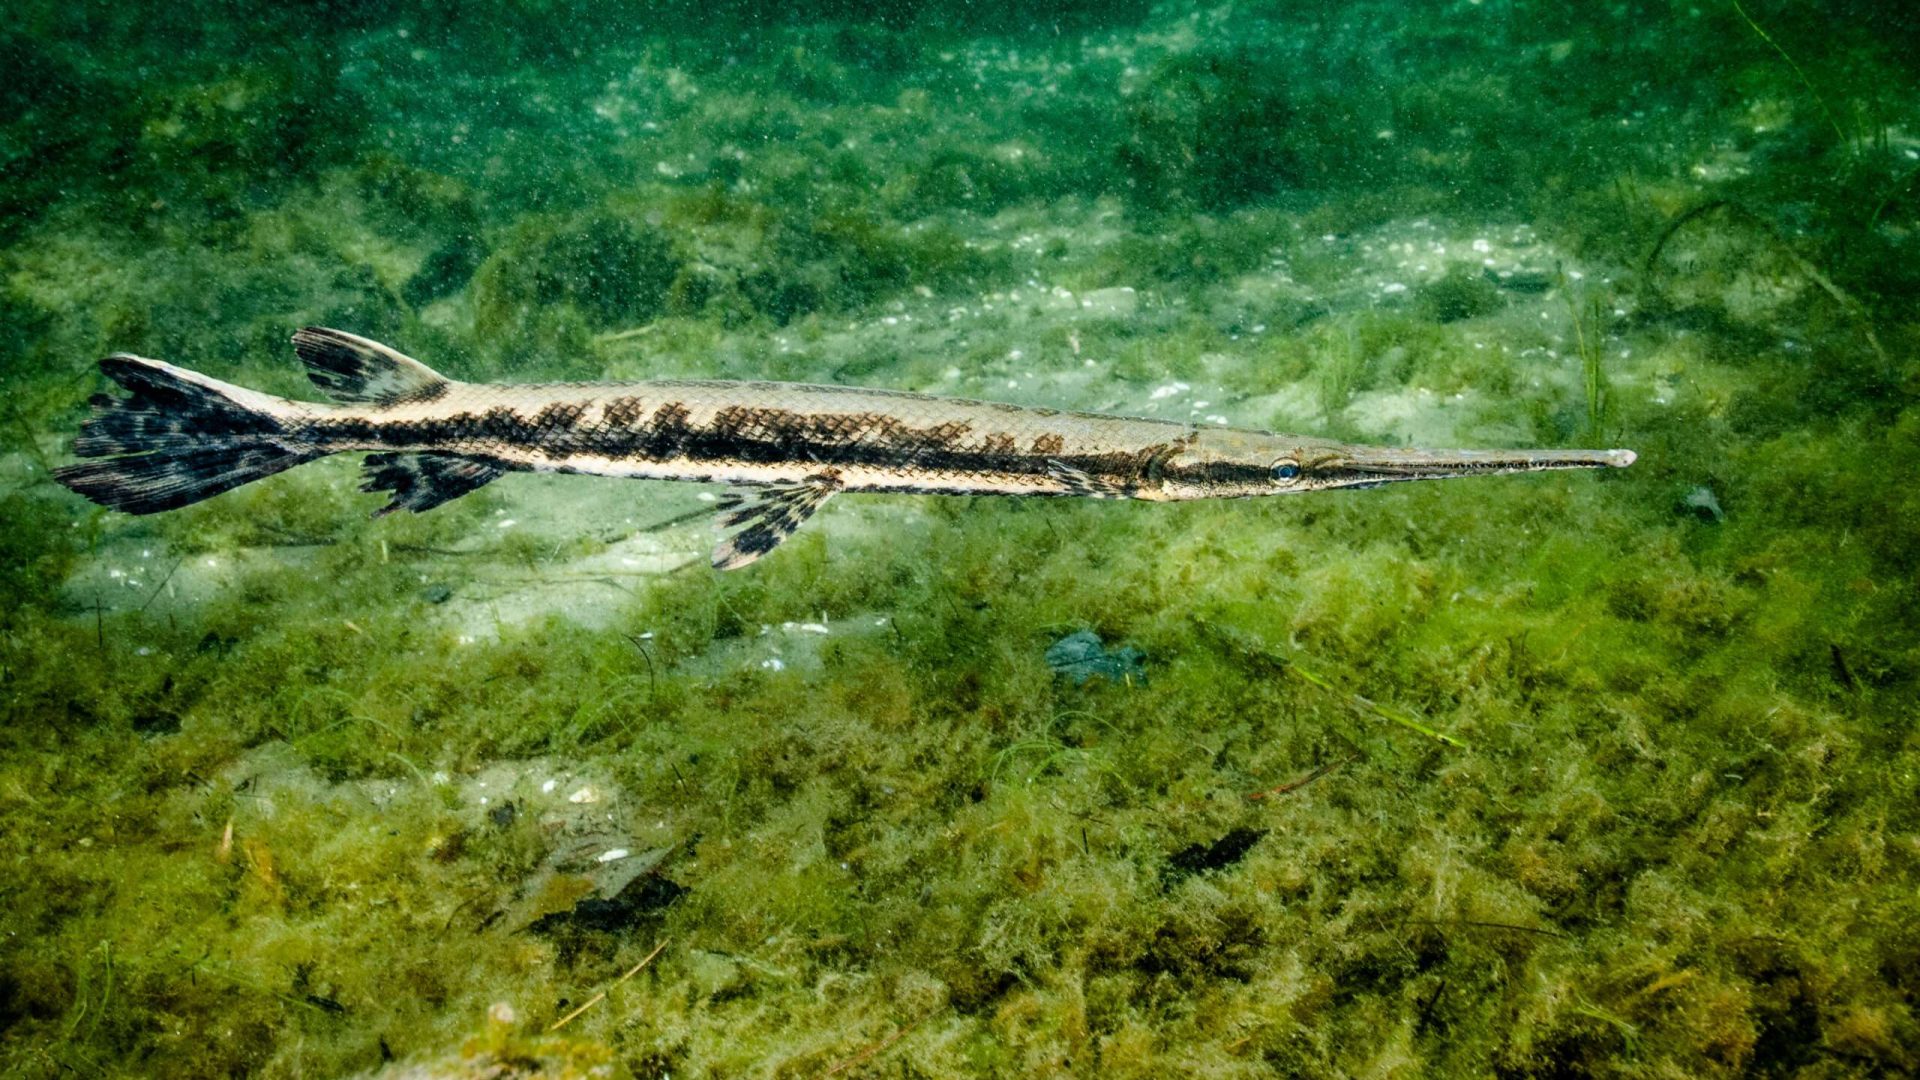 Long-snouted fish in underwater greenery